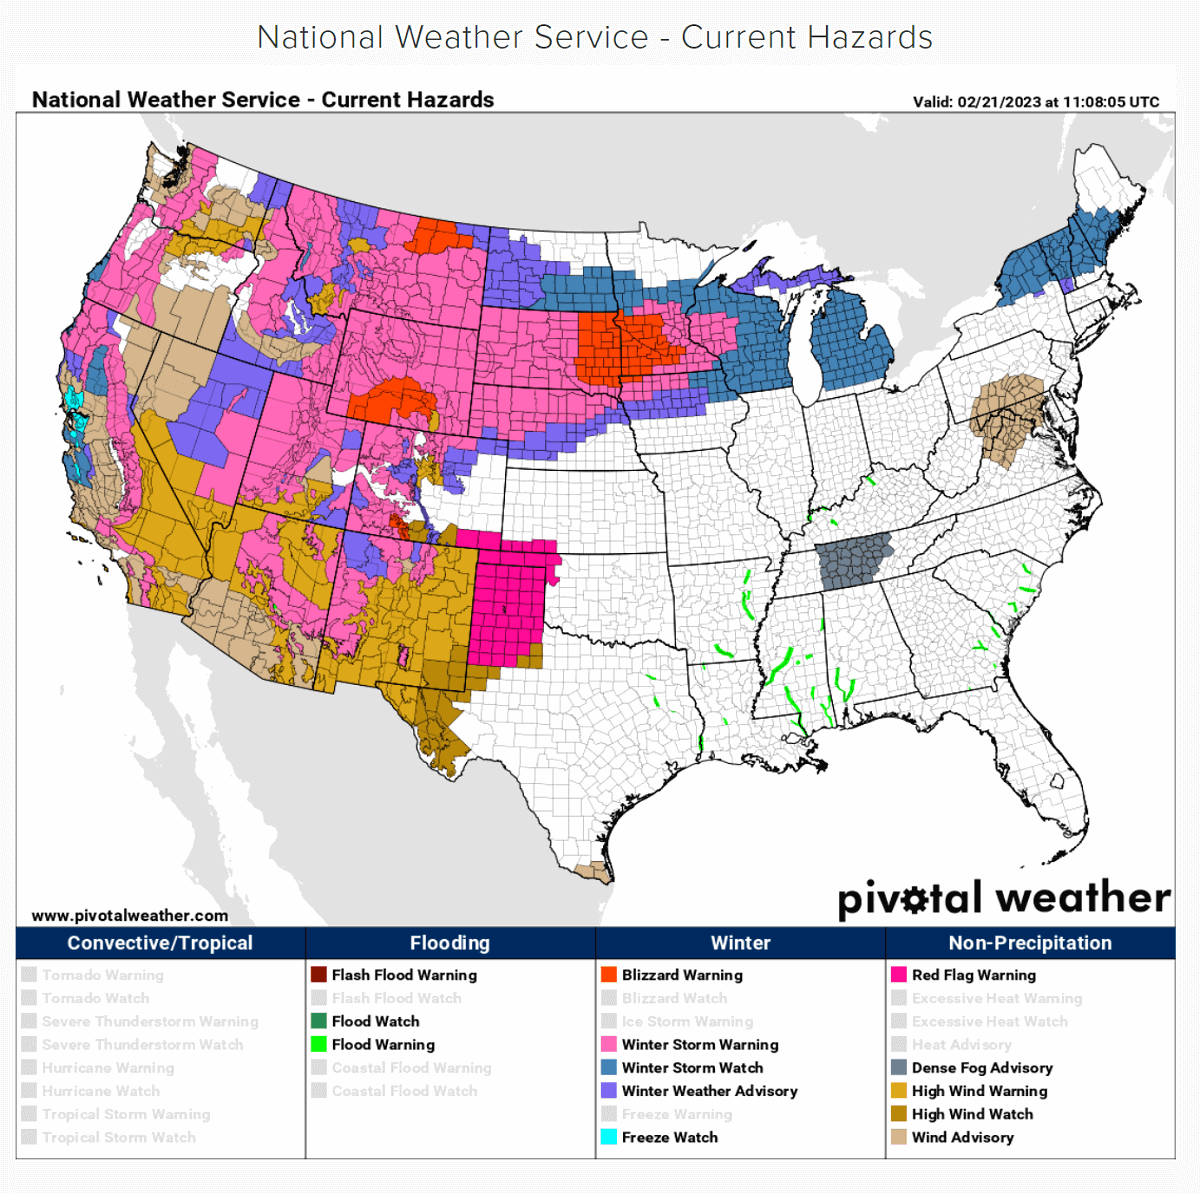 winter-season-storm-olive-snow-ice-midwest-canada-united-states-warning